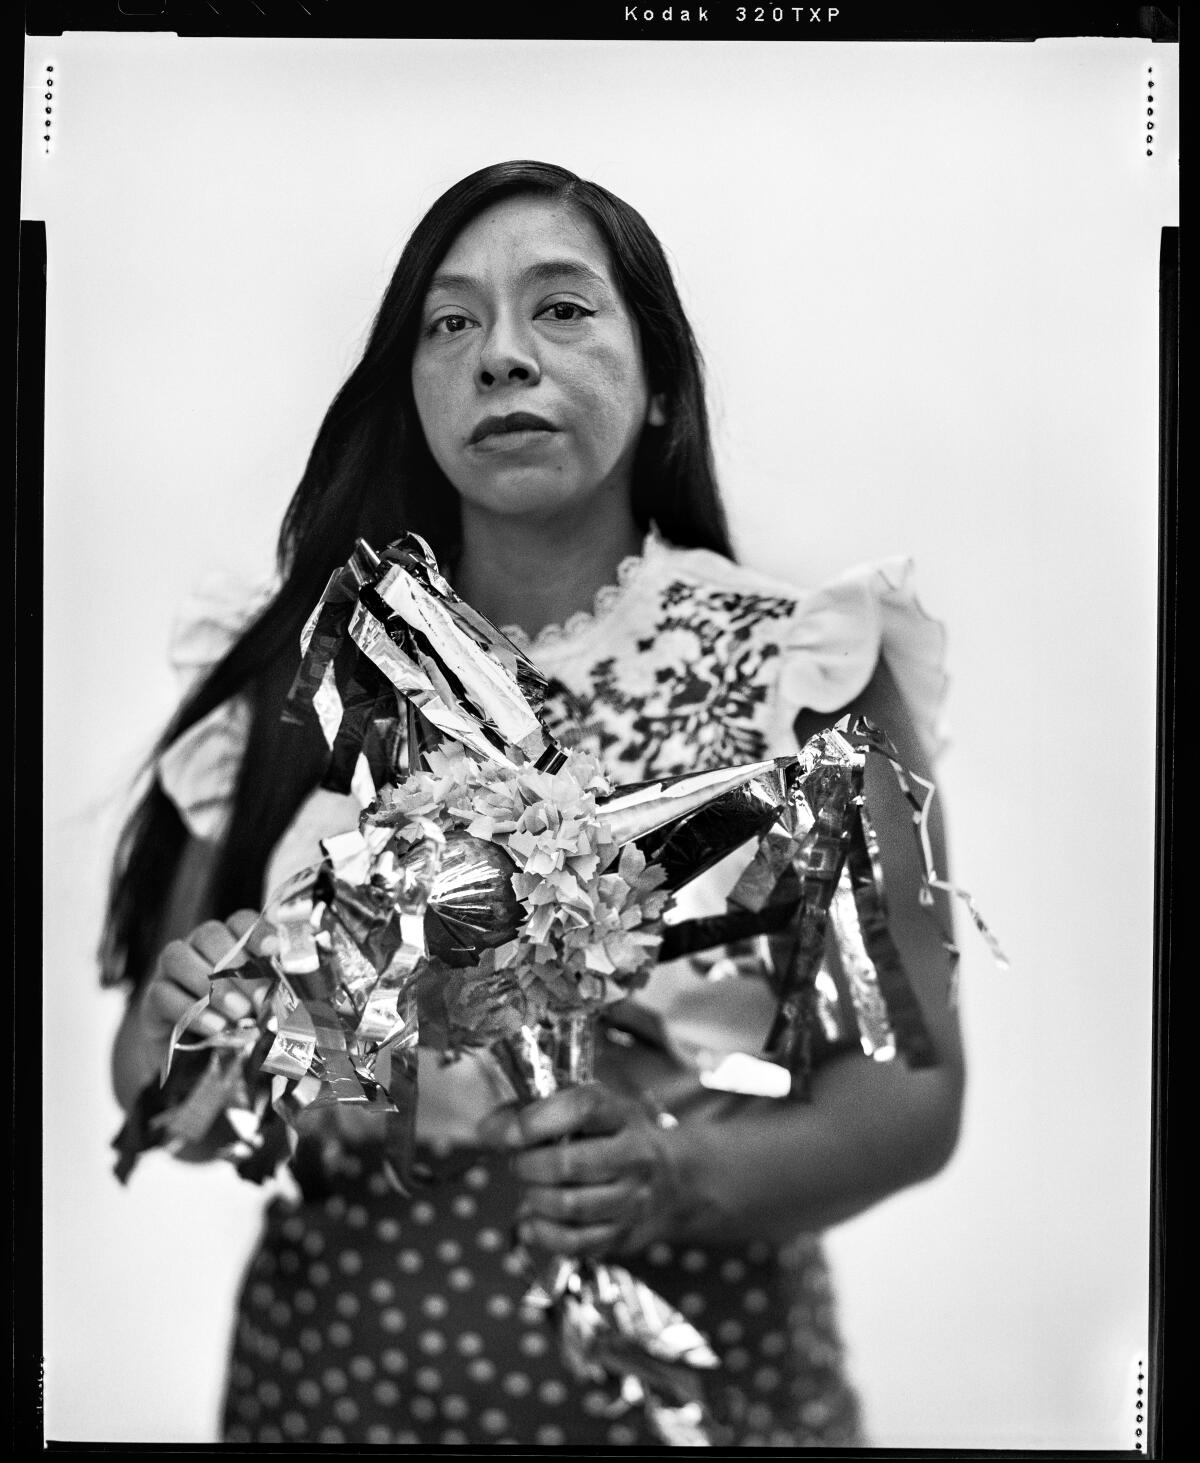 Black and white film photo of a Mexican woman, Michelle Reyes, holding a starburst-shaped piñata